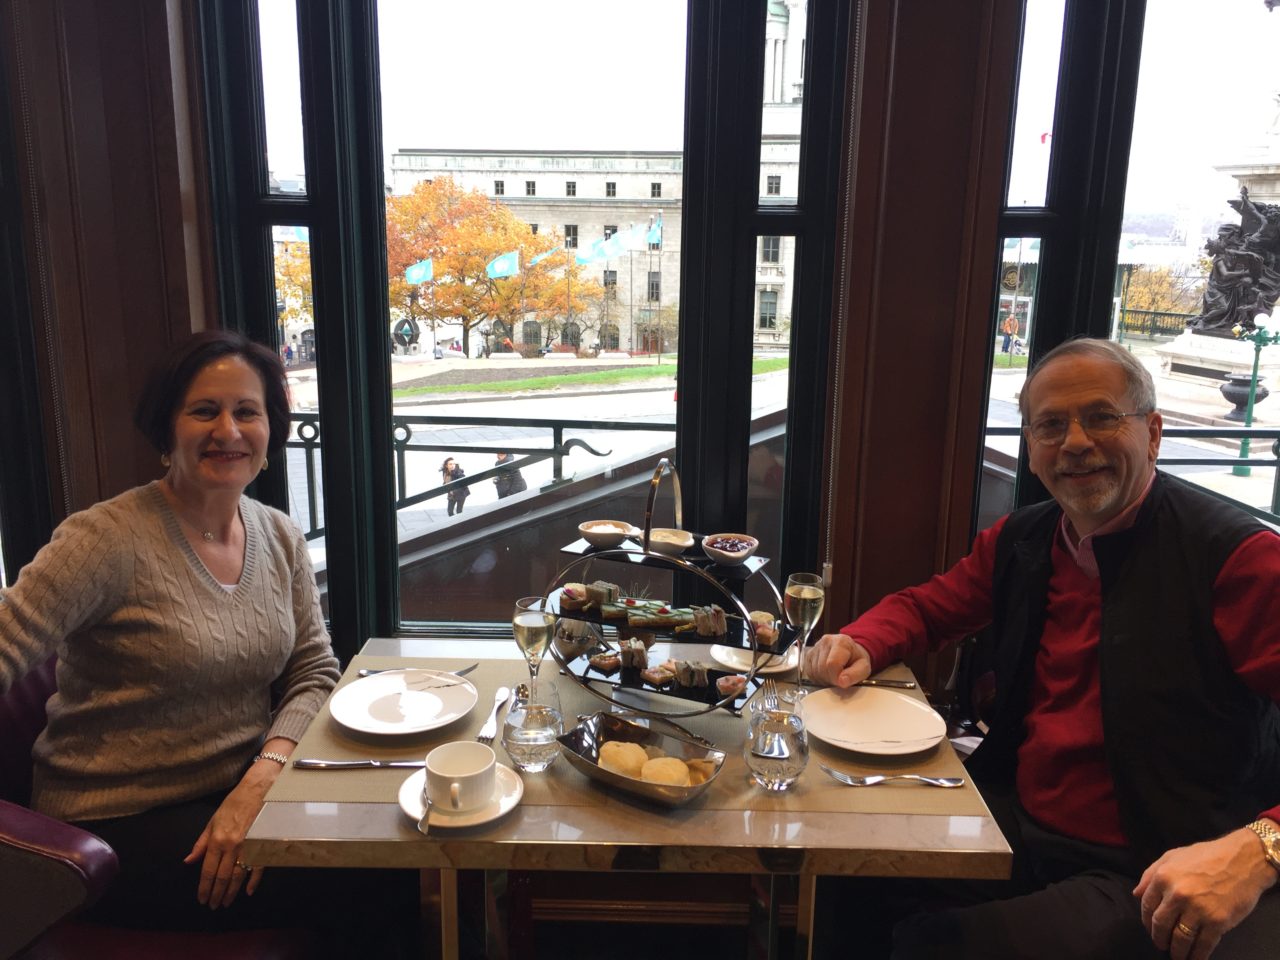 Afternoon Tea at the Champlain Restaurant of the Fairmont Le Chateau Frontenac